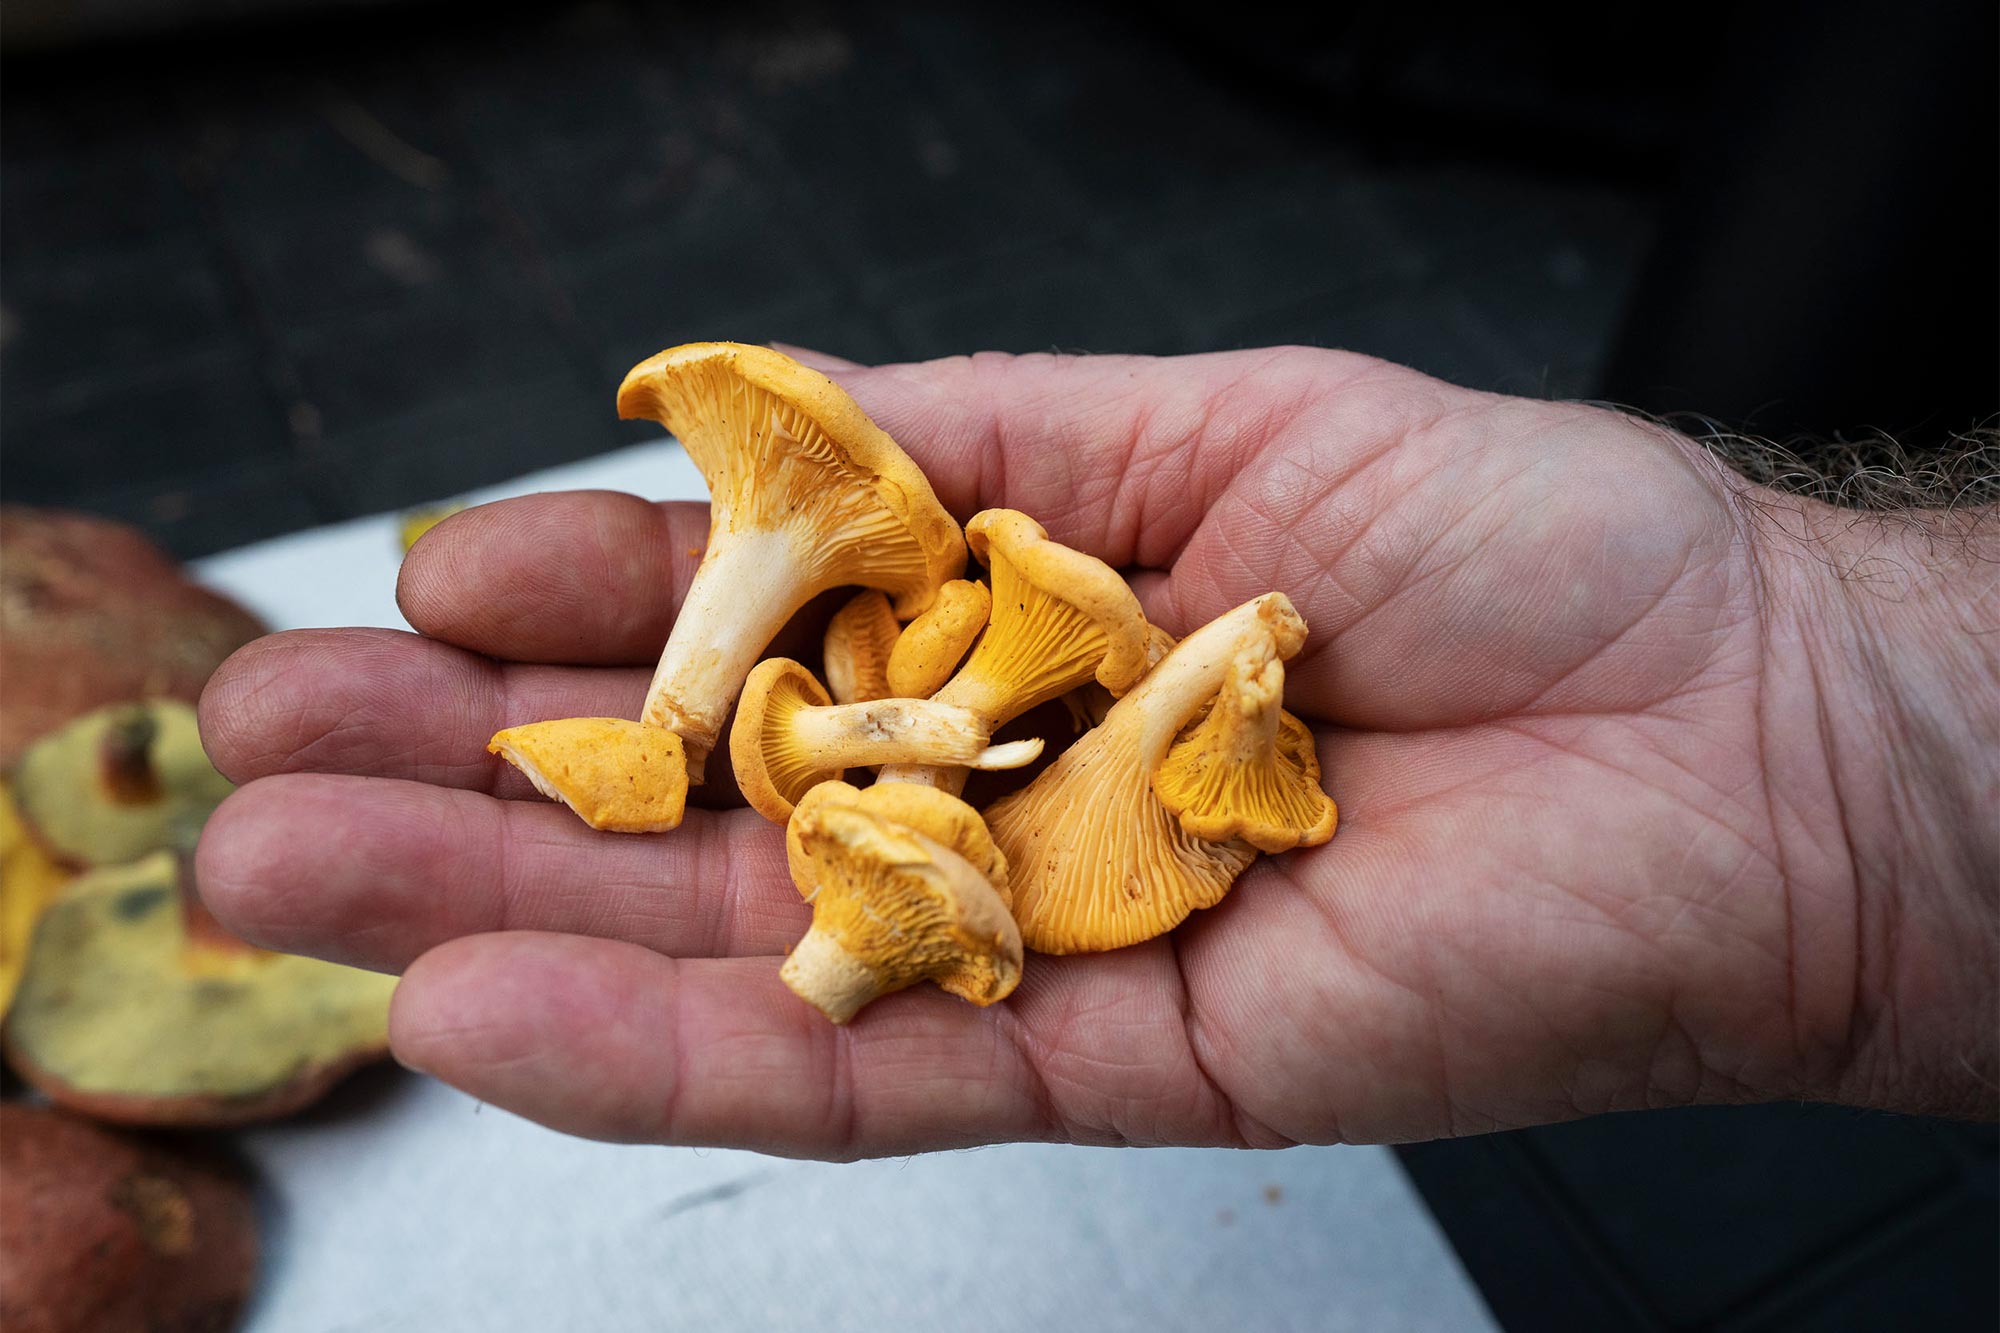 A hand holds several yellow, frilly mushrooms